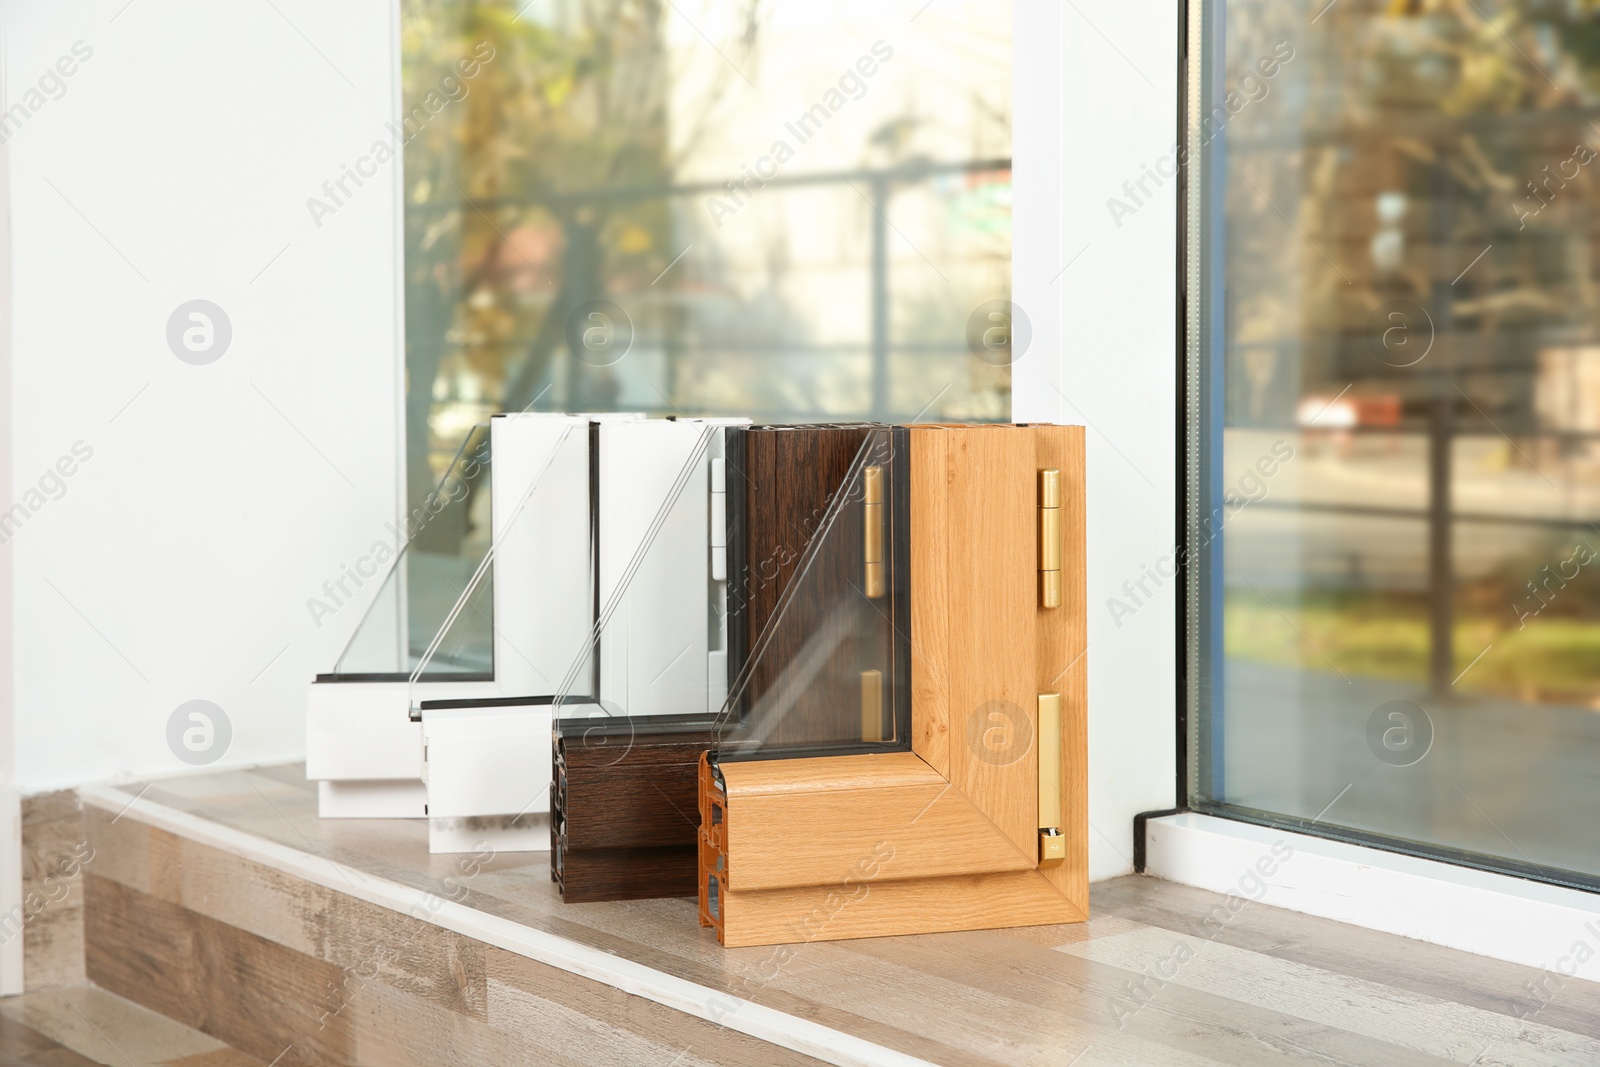 Photo of Samples of modern window profiles on sill indoors, space for text. Installation service